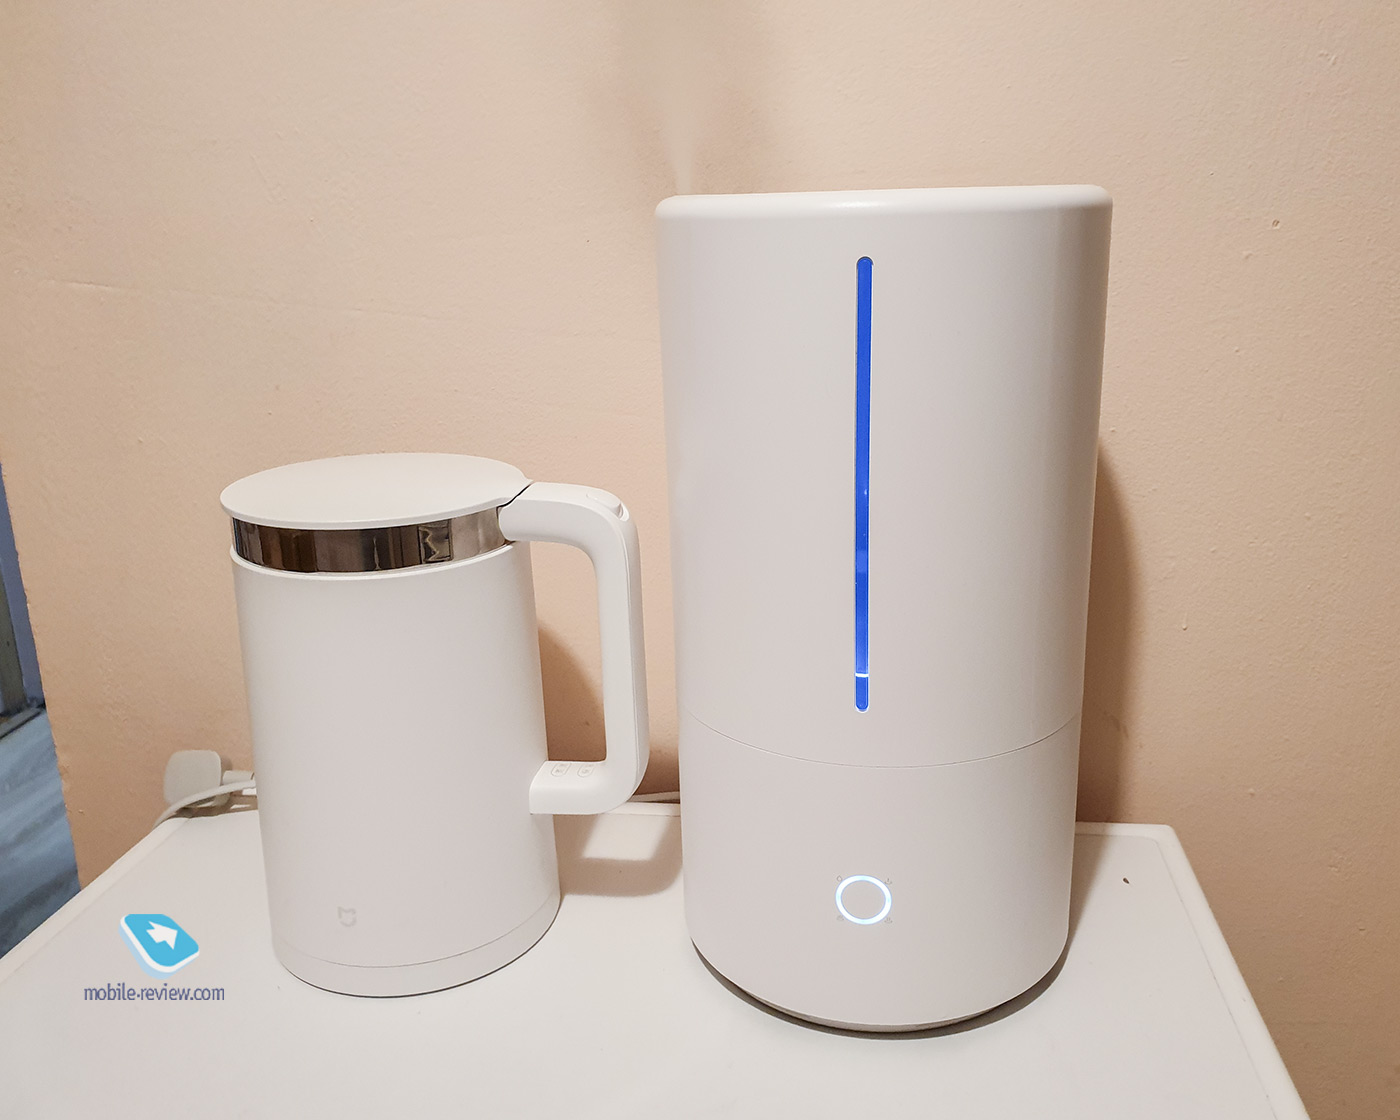 Review of Xiaomi Mi Smart Antibacterial Humidifier (for the wettest dreams)